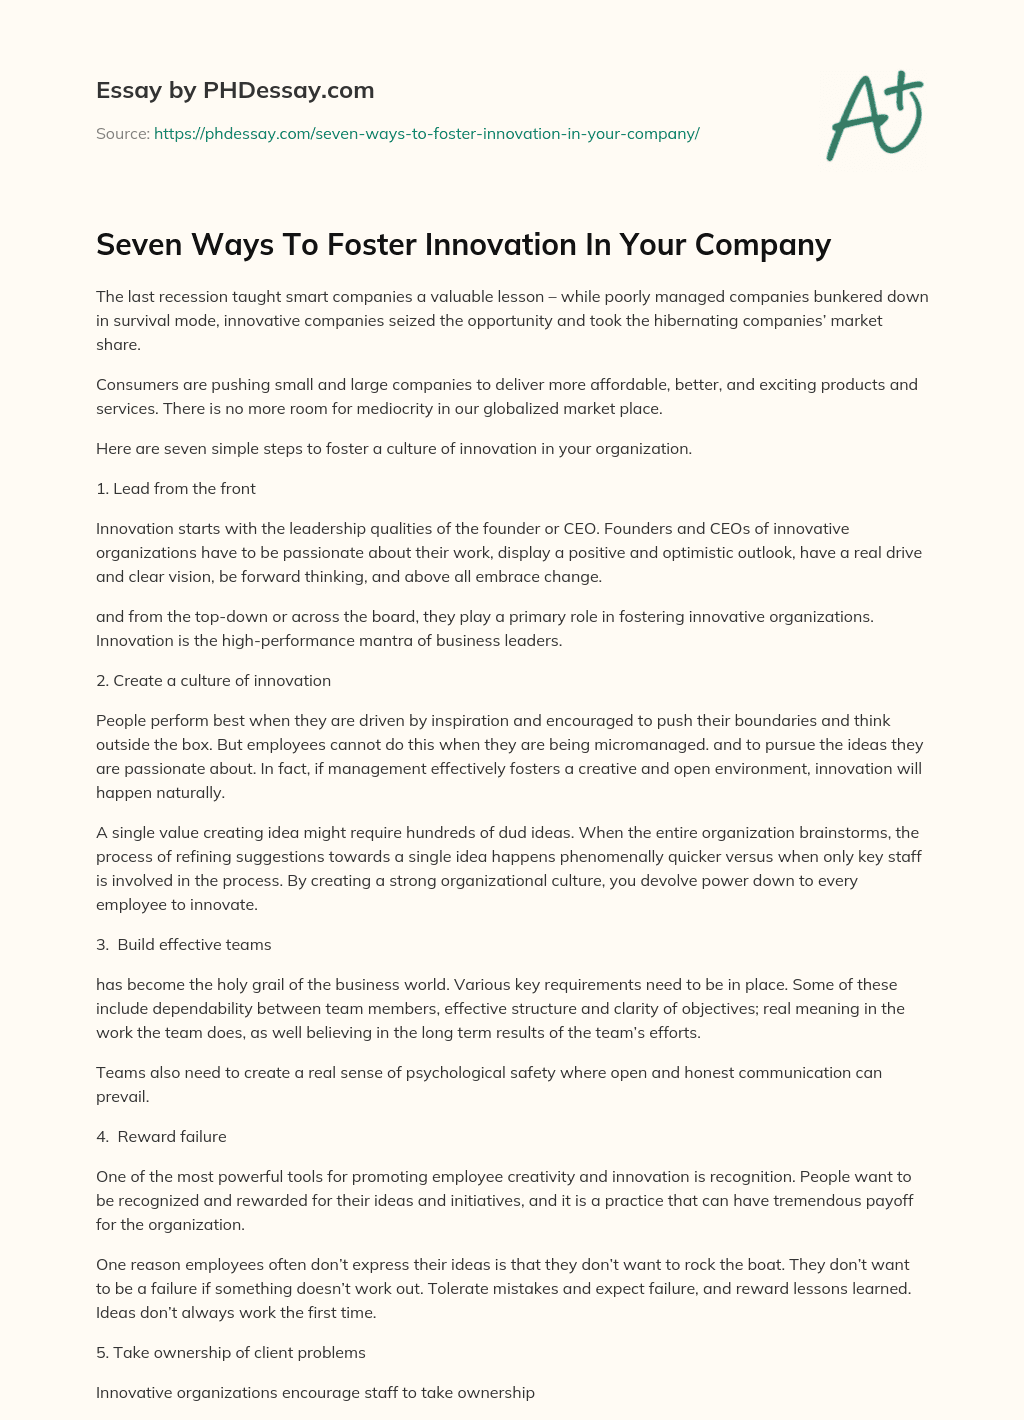 Seven Ways To Foster Innovation In Your Company essay